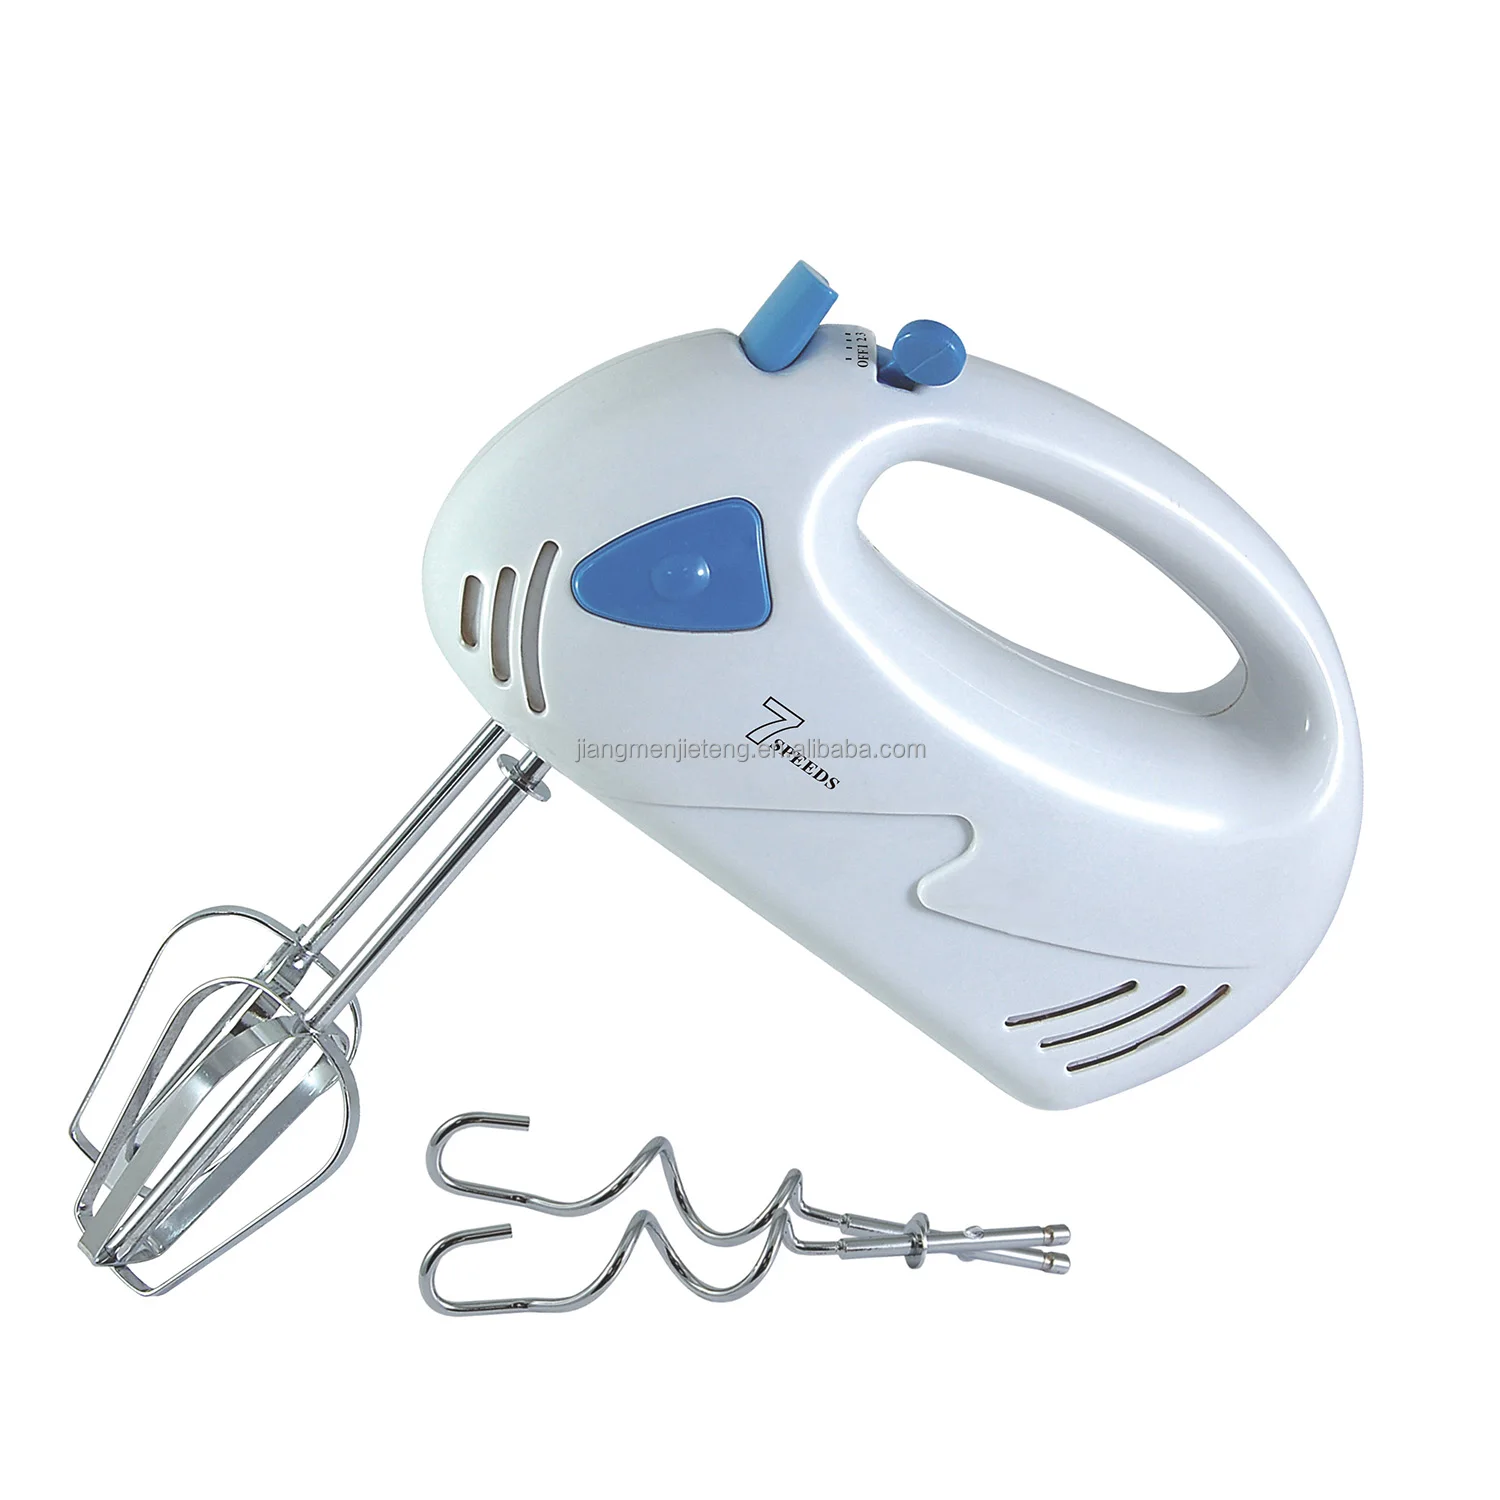 Dropship 1pc 7-Speed Electric Hand Mixer - Egg Beater, Whisk, Breaker, And  Stirrer - Home Appliance For Kitchen Bowl Aid And Food Mixing to Sell  Online at a Lower Price